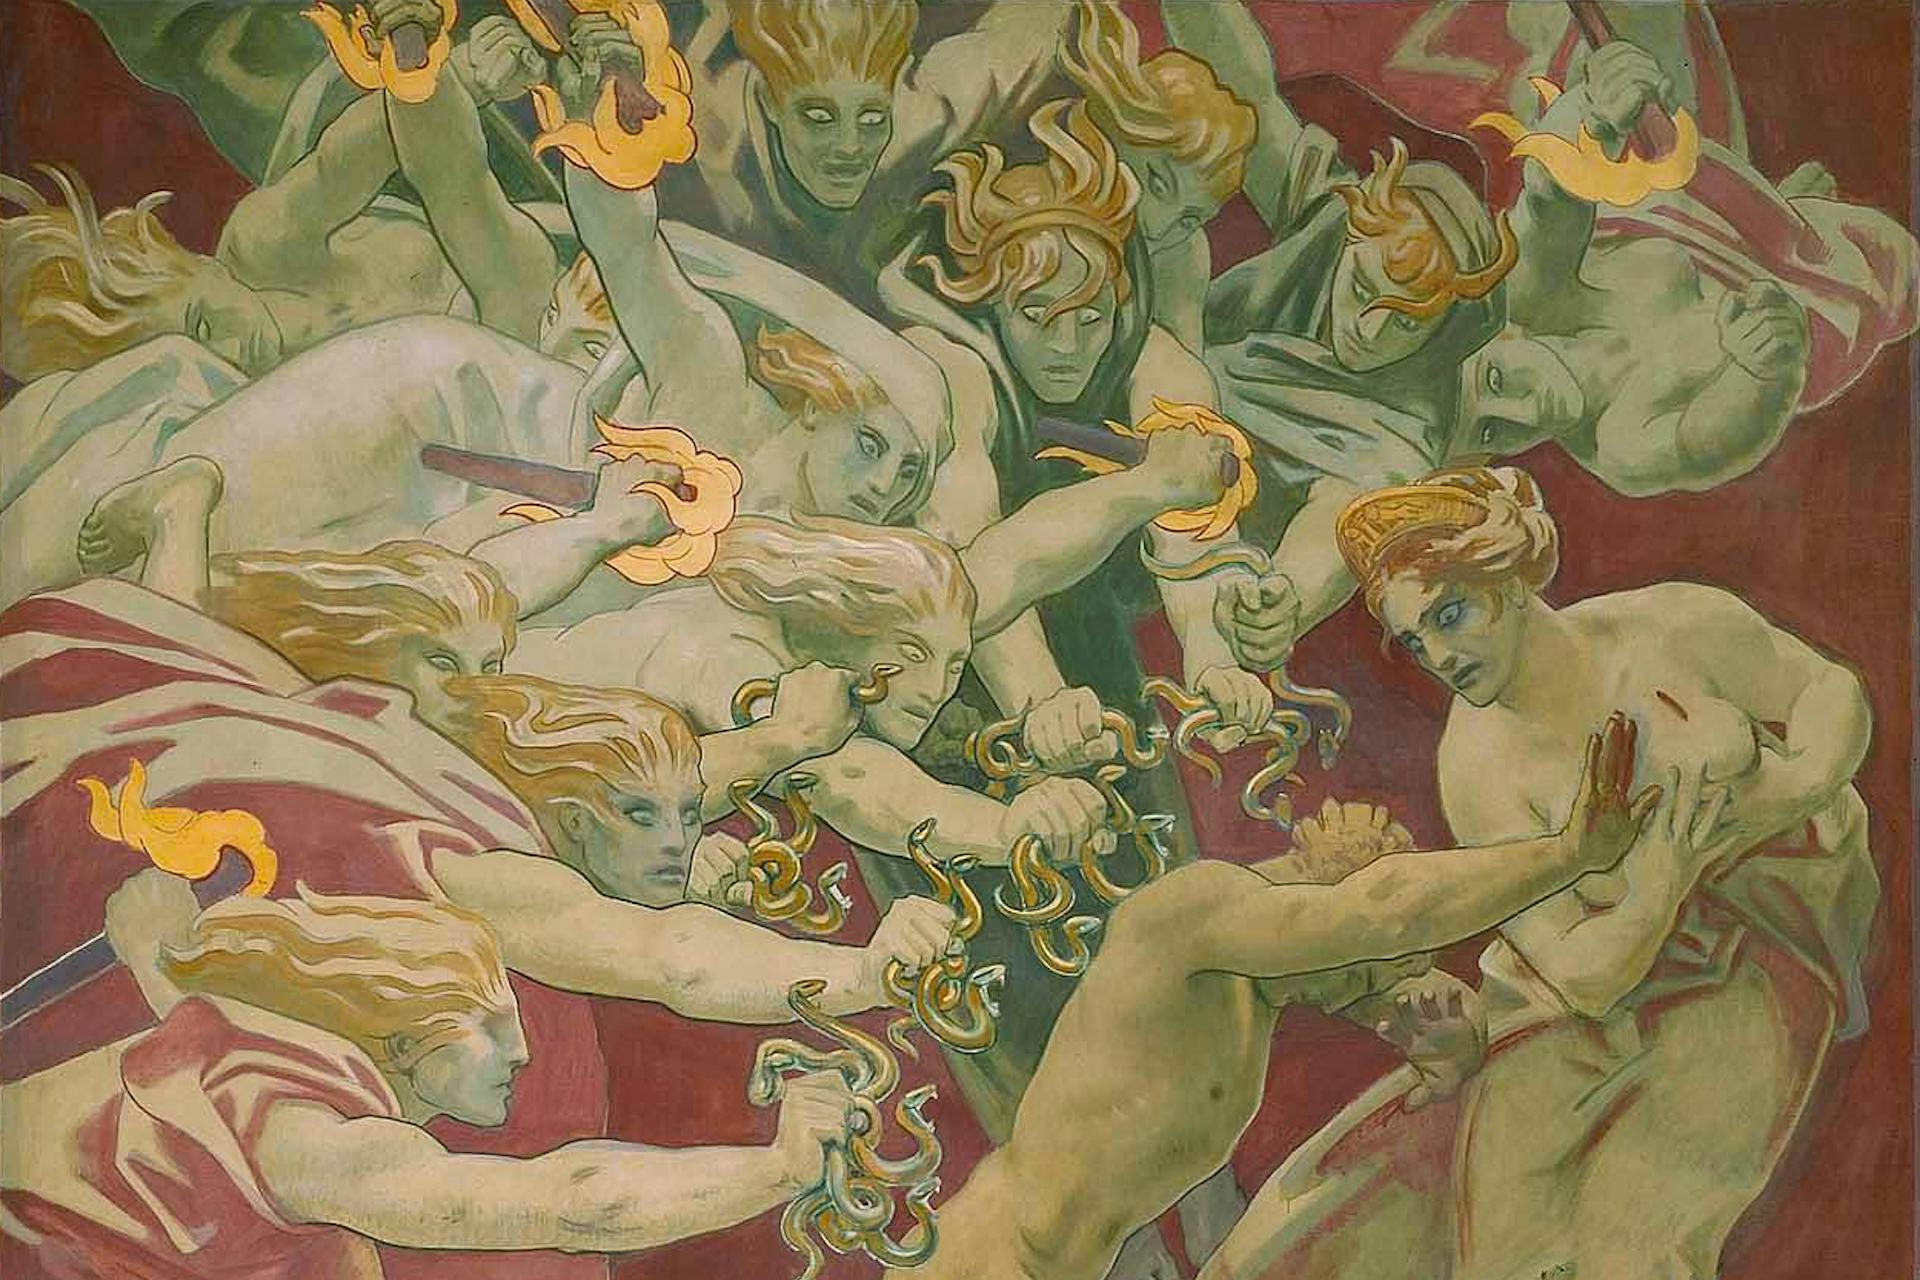 Orestes Pursued by the Furies by John Singer Sargent (1921)